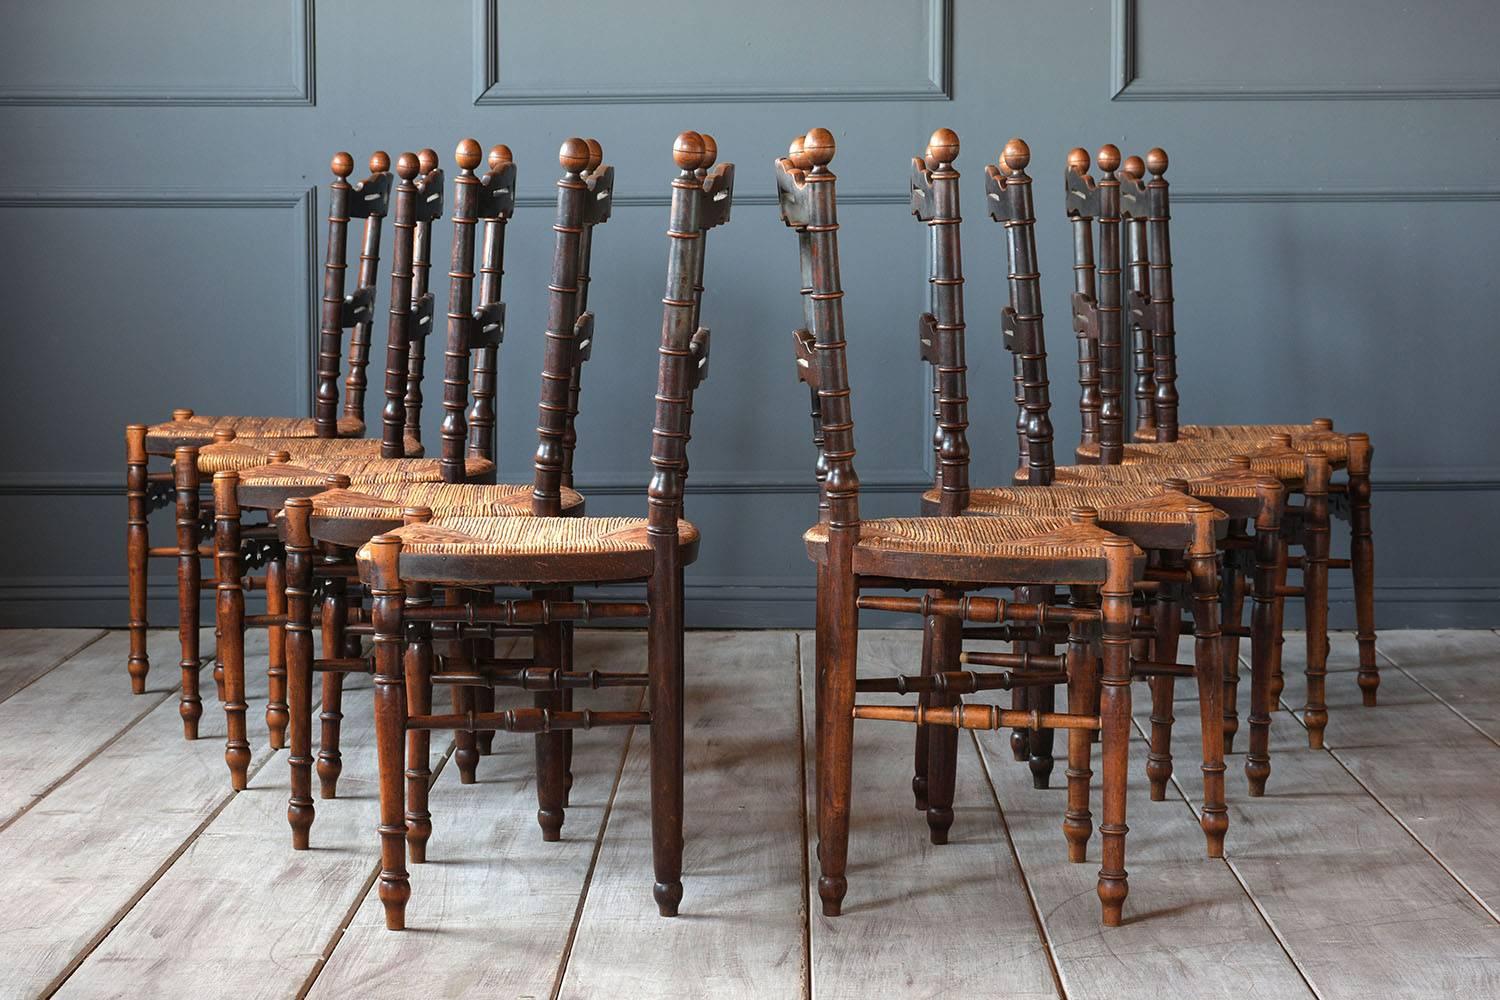 This set of ten 1900s French Provincial-style dining room chairs feature a solid walnut wood frame with the original finish. The frame has a ladder back with turned wood details on the legs and back supports. The chairs are finished with rush seats